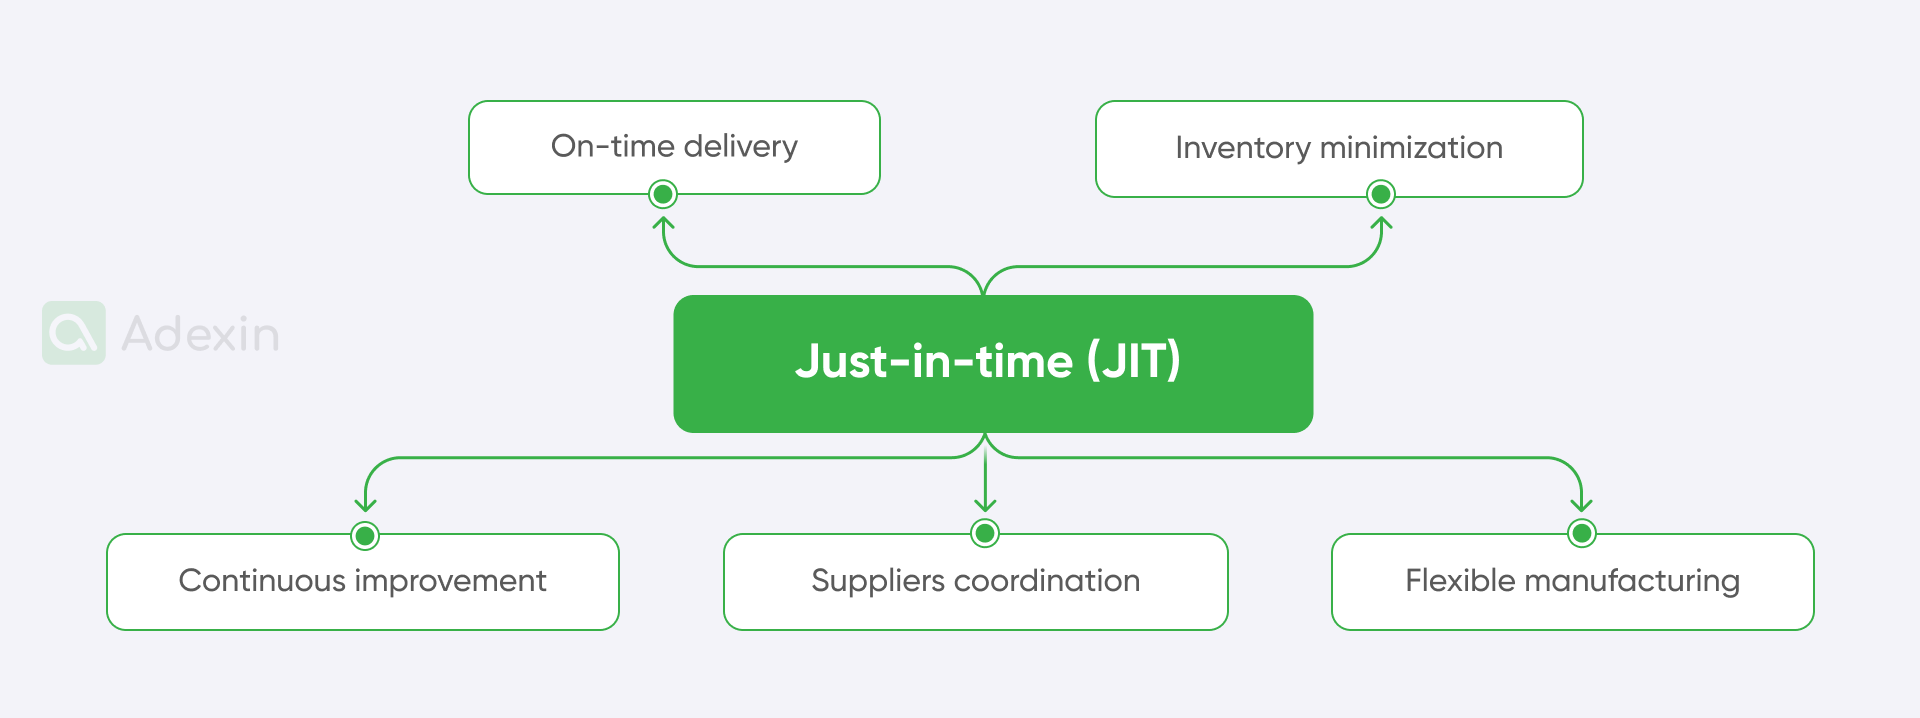 Principles of just-in-time delivery